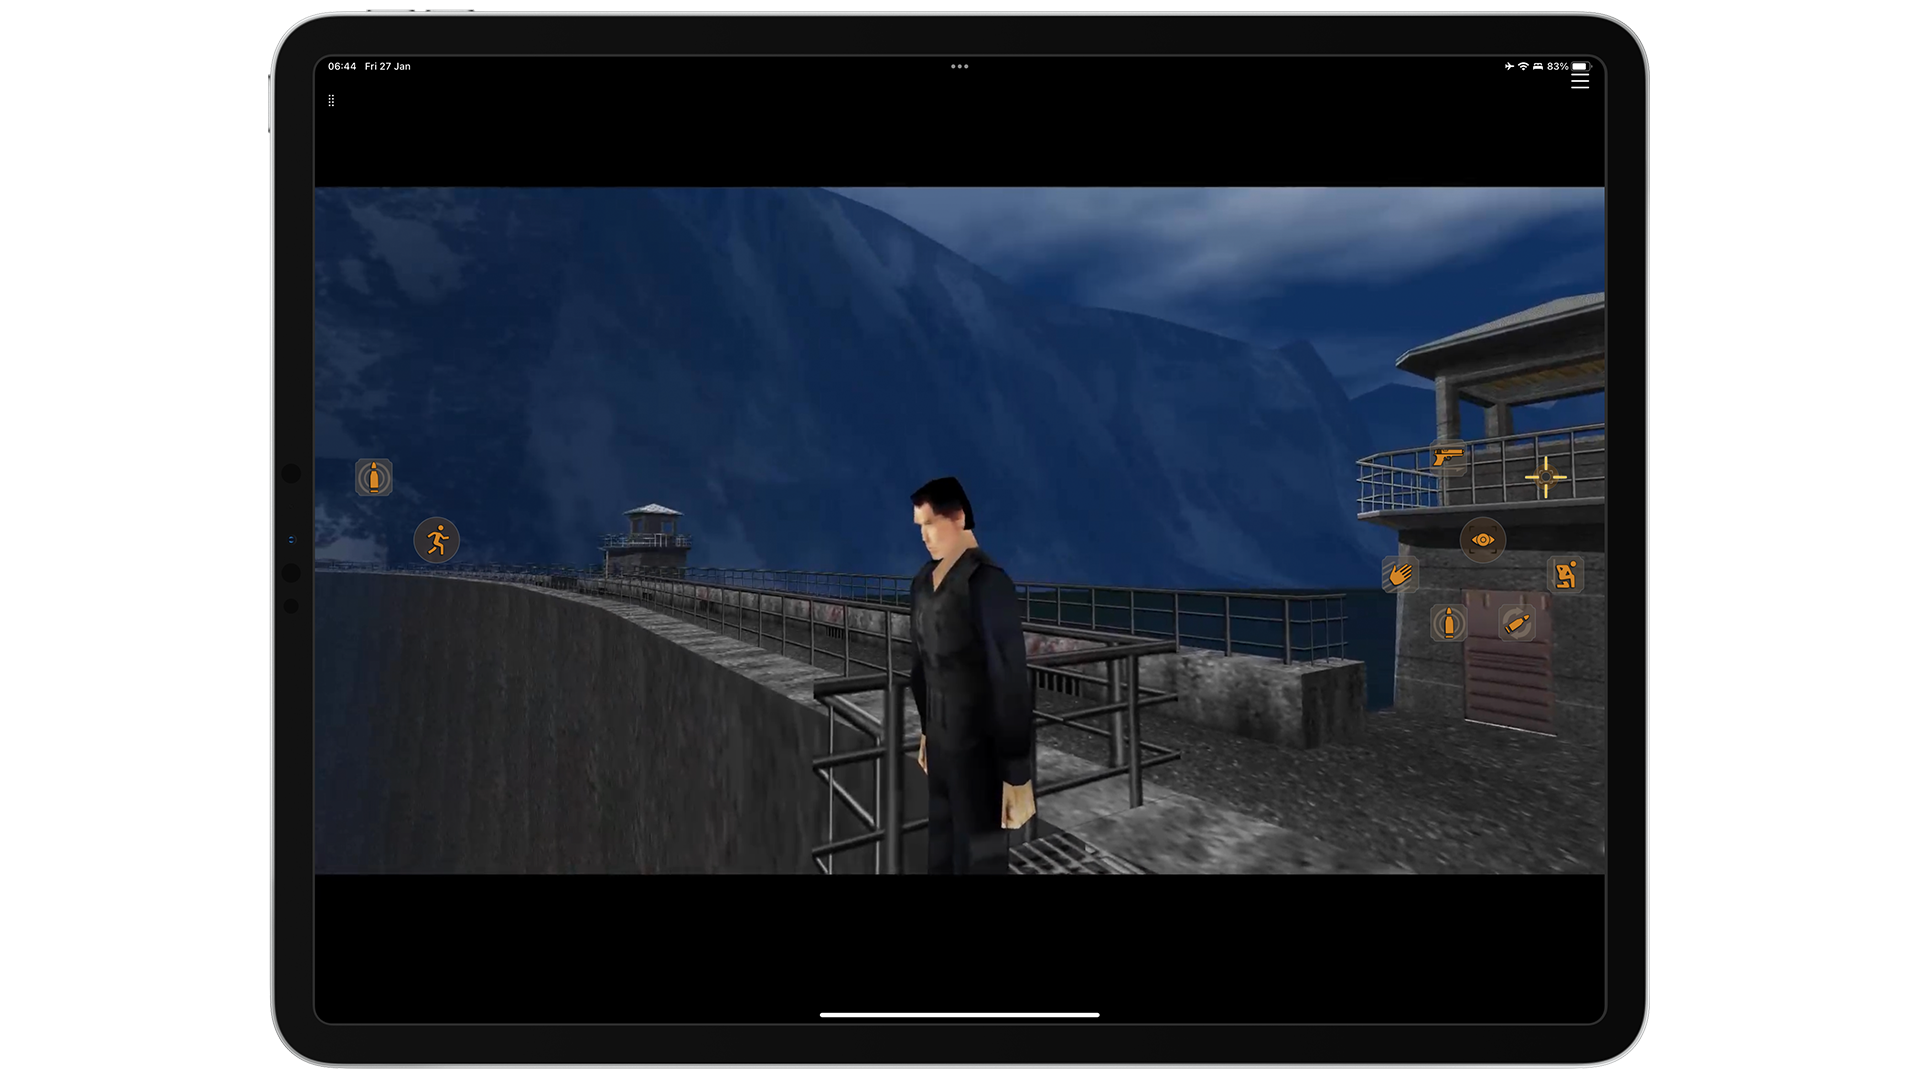 GoldenEye on iPad with touch controls